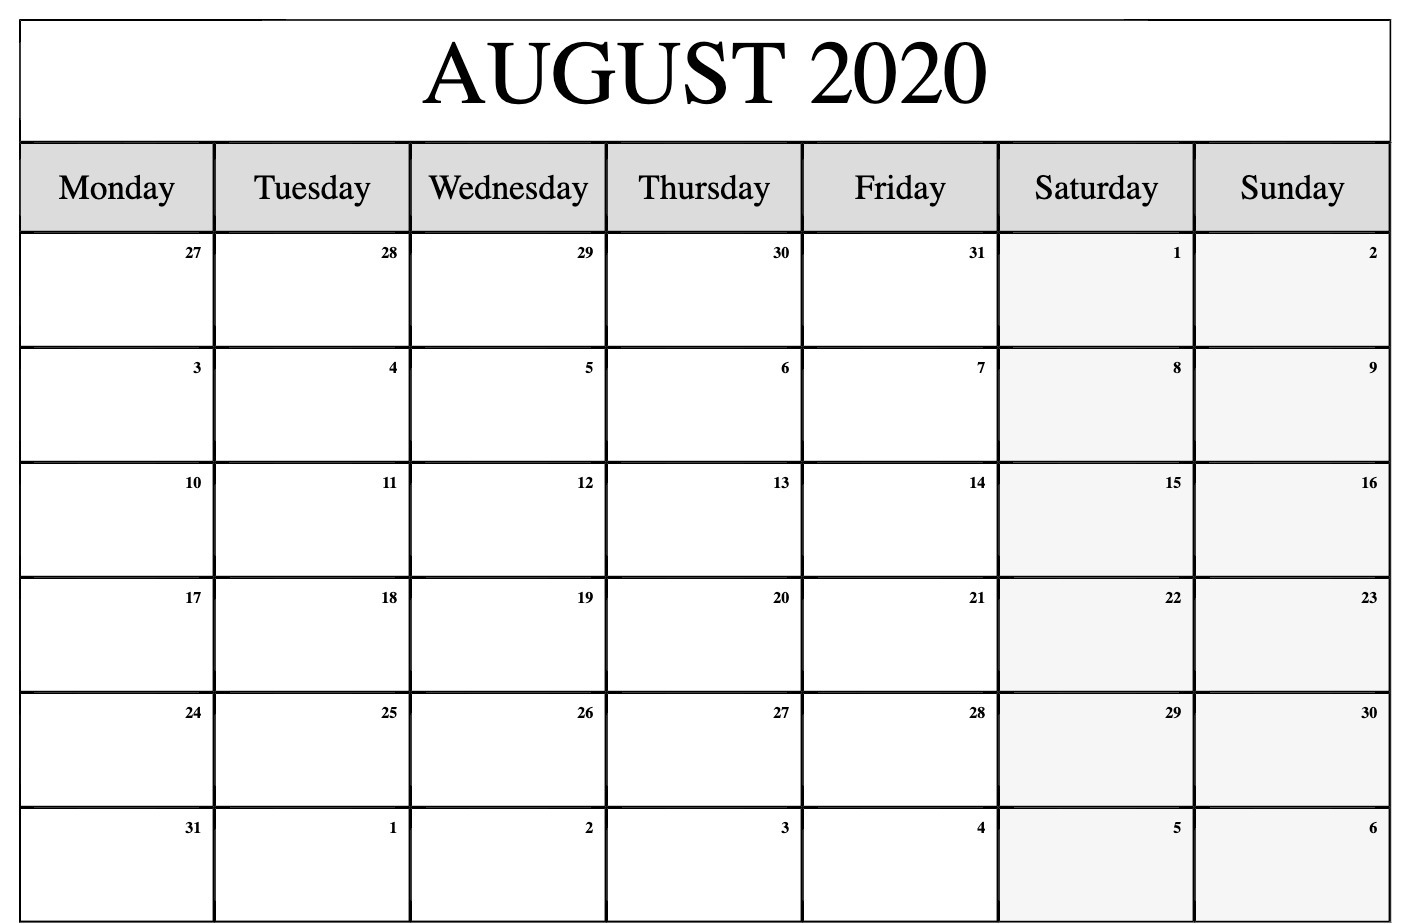 August 2020 Calendar Printable Template With Holidays